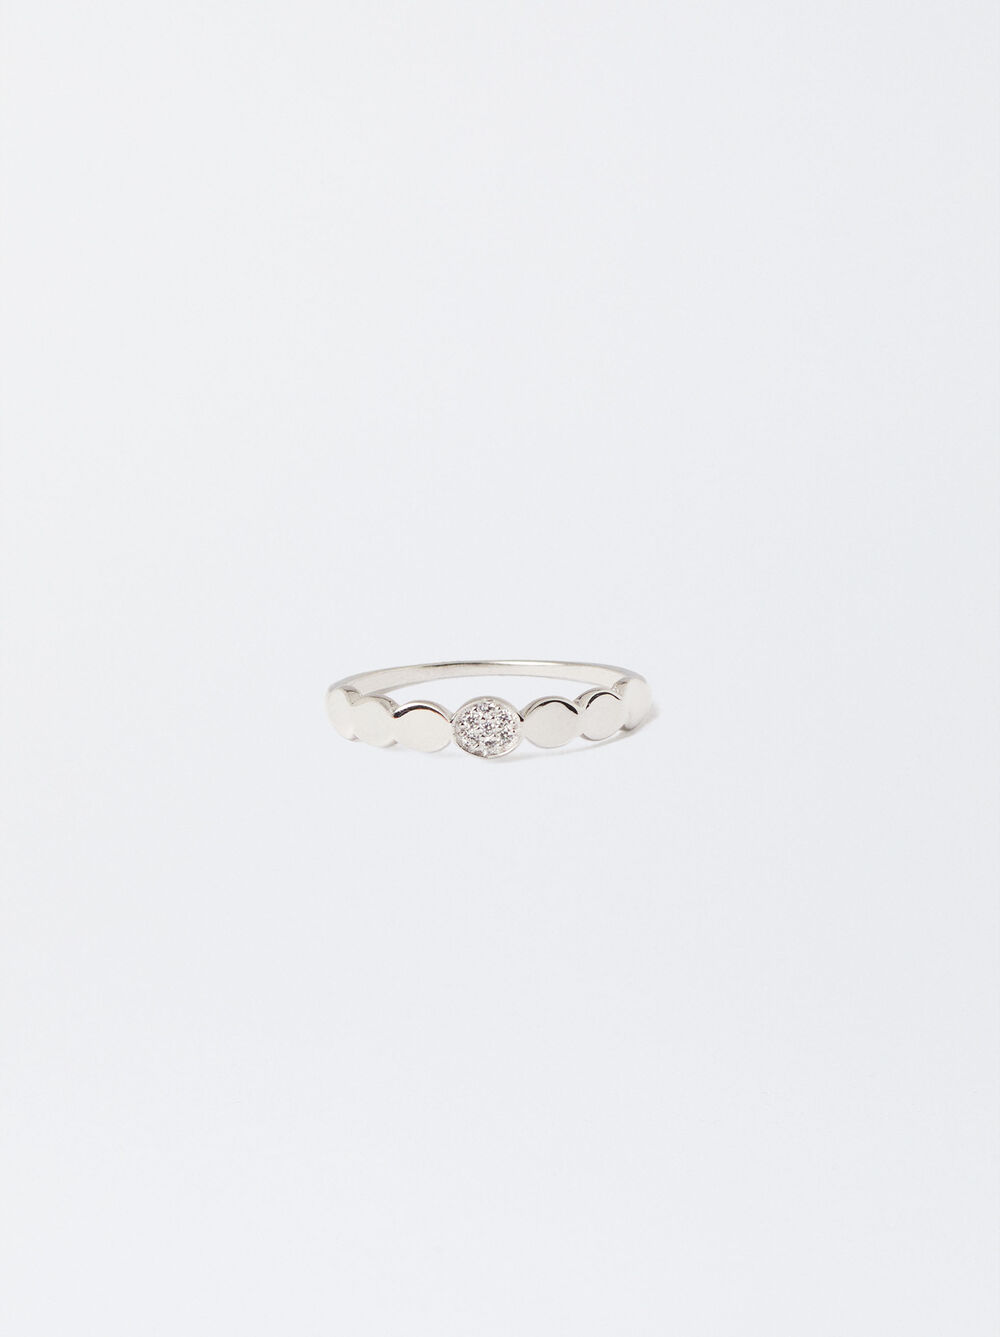 926 Silver Ring With Zirconia